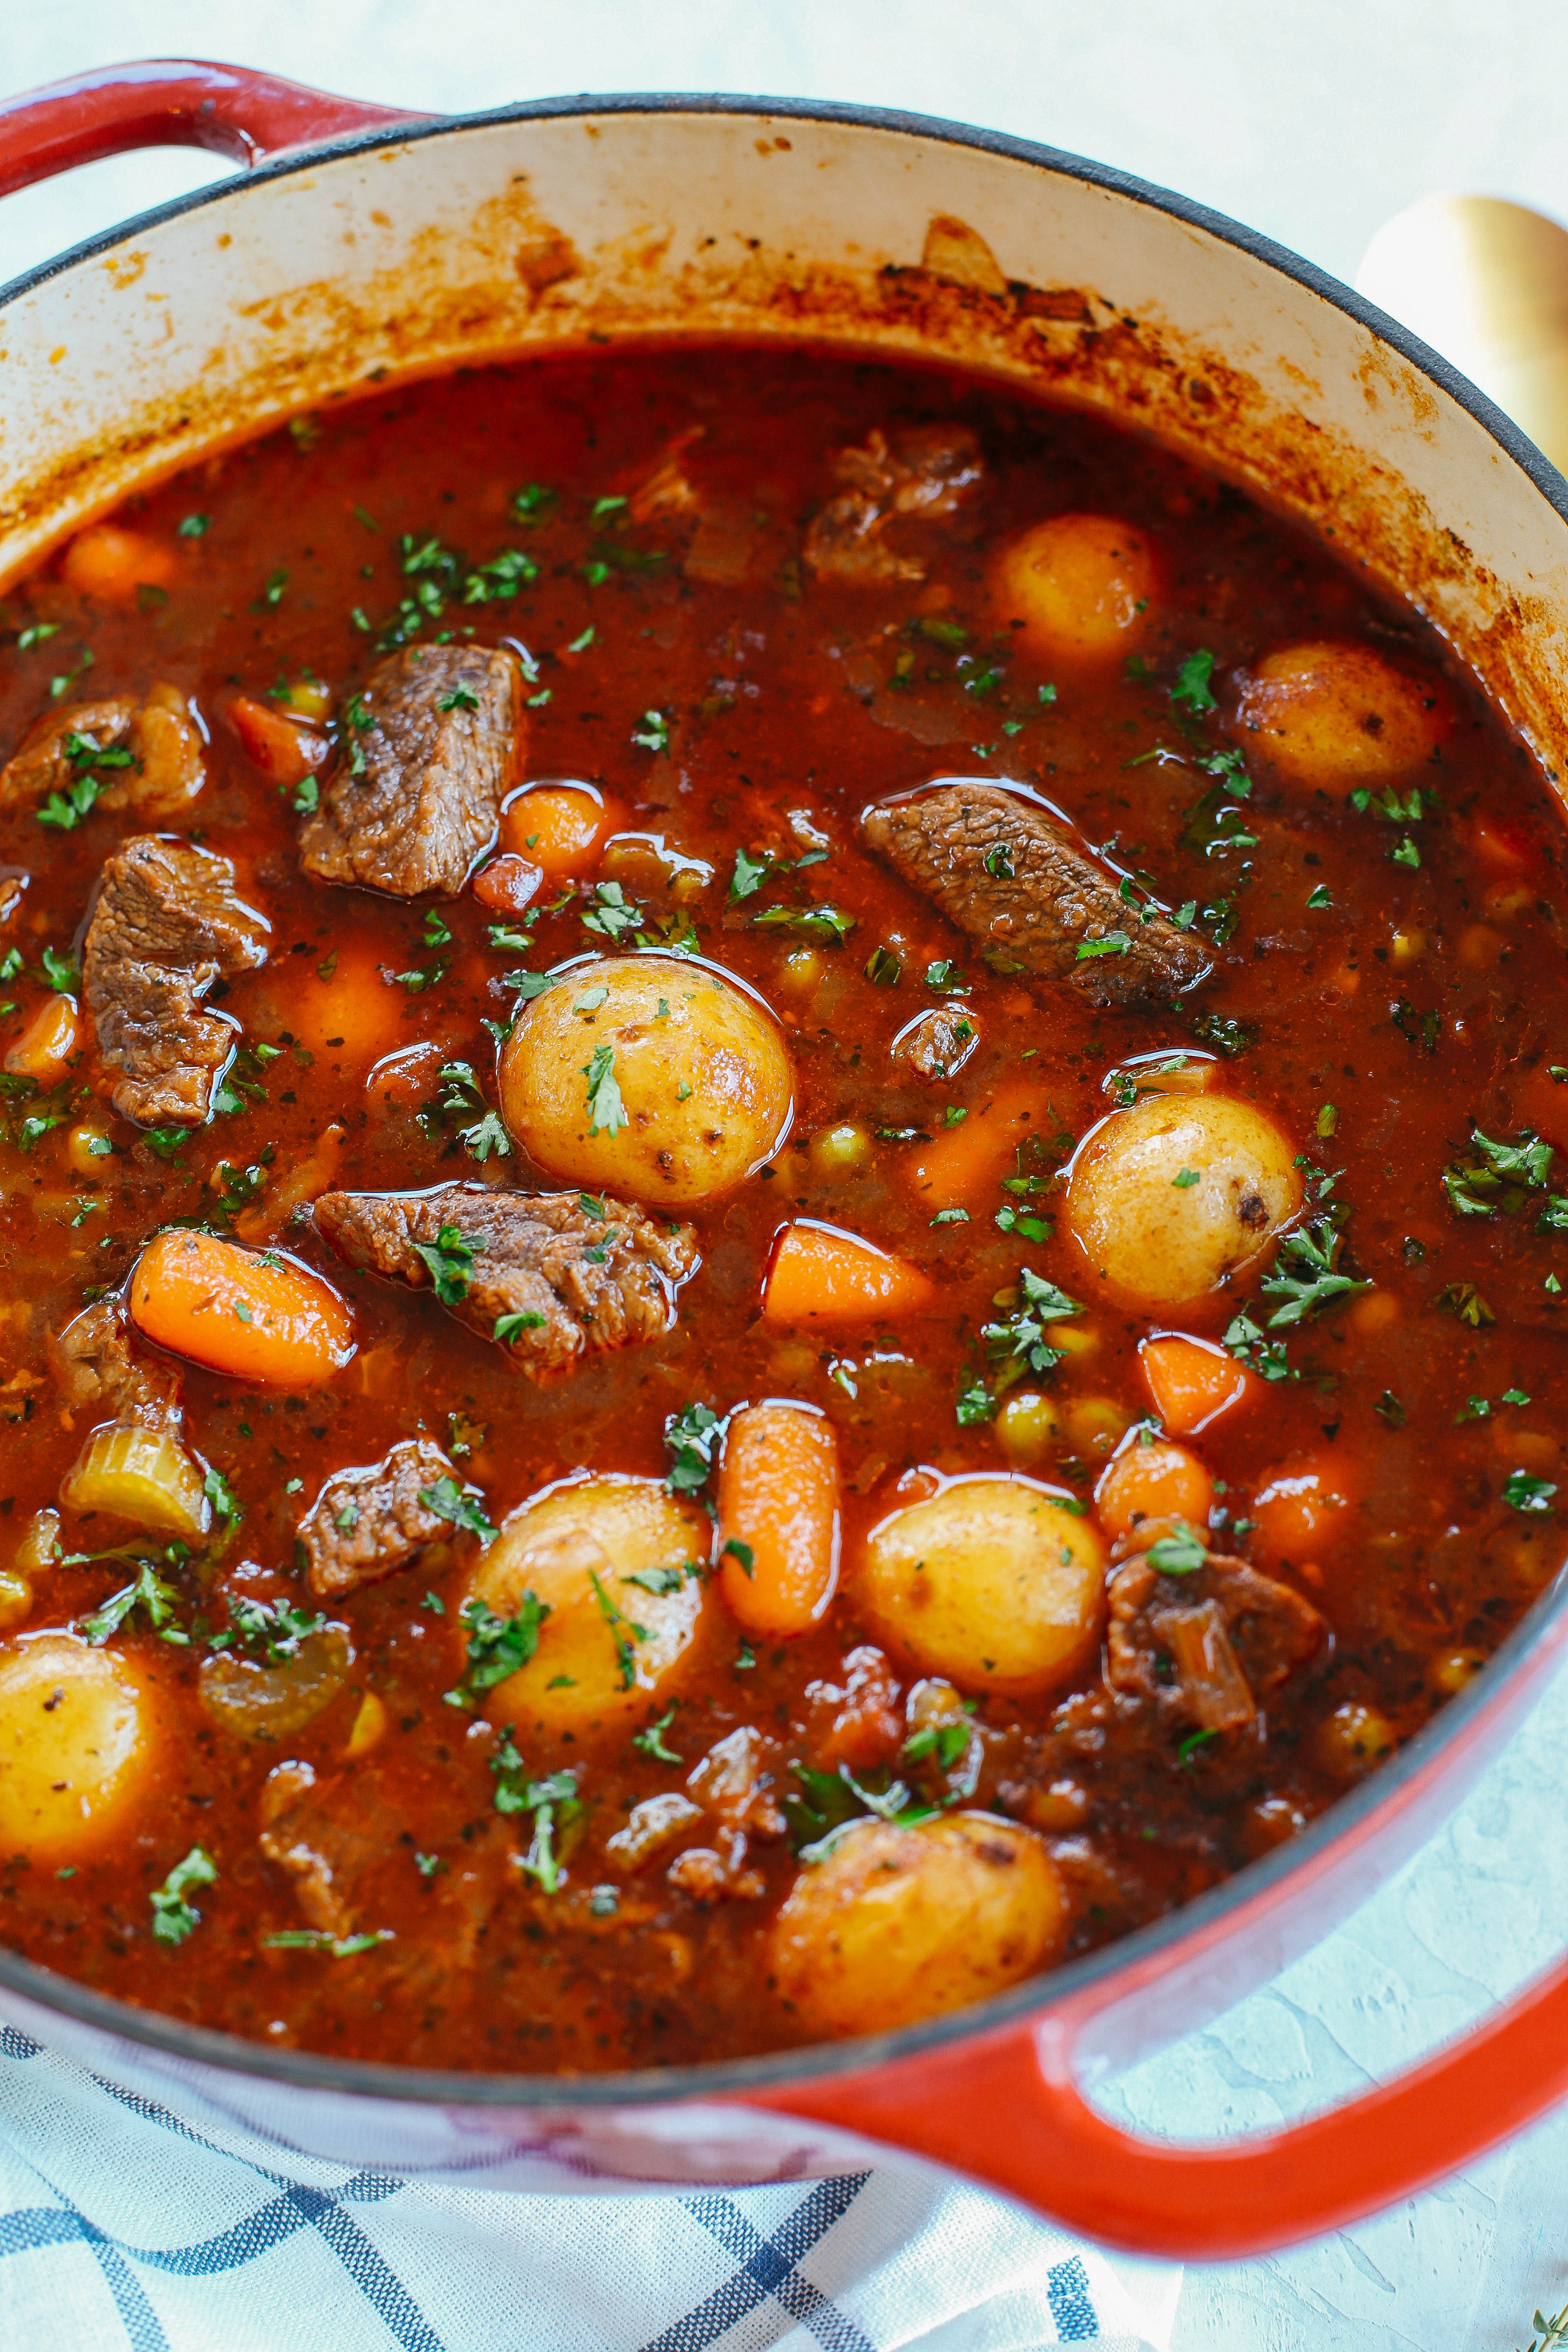 This classic hearty beef and tomato stew is true comfort food at its finest and can easily be made in your instant pot, slow cooker or right on the stove!